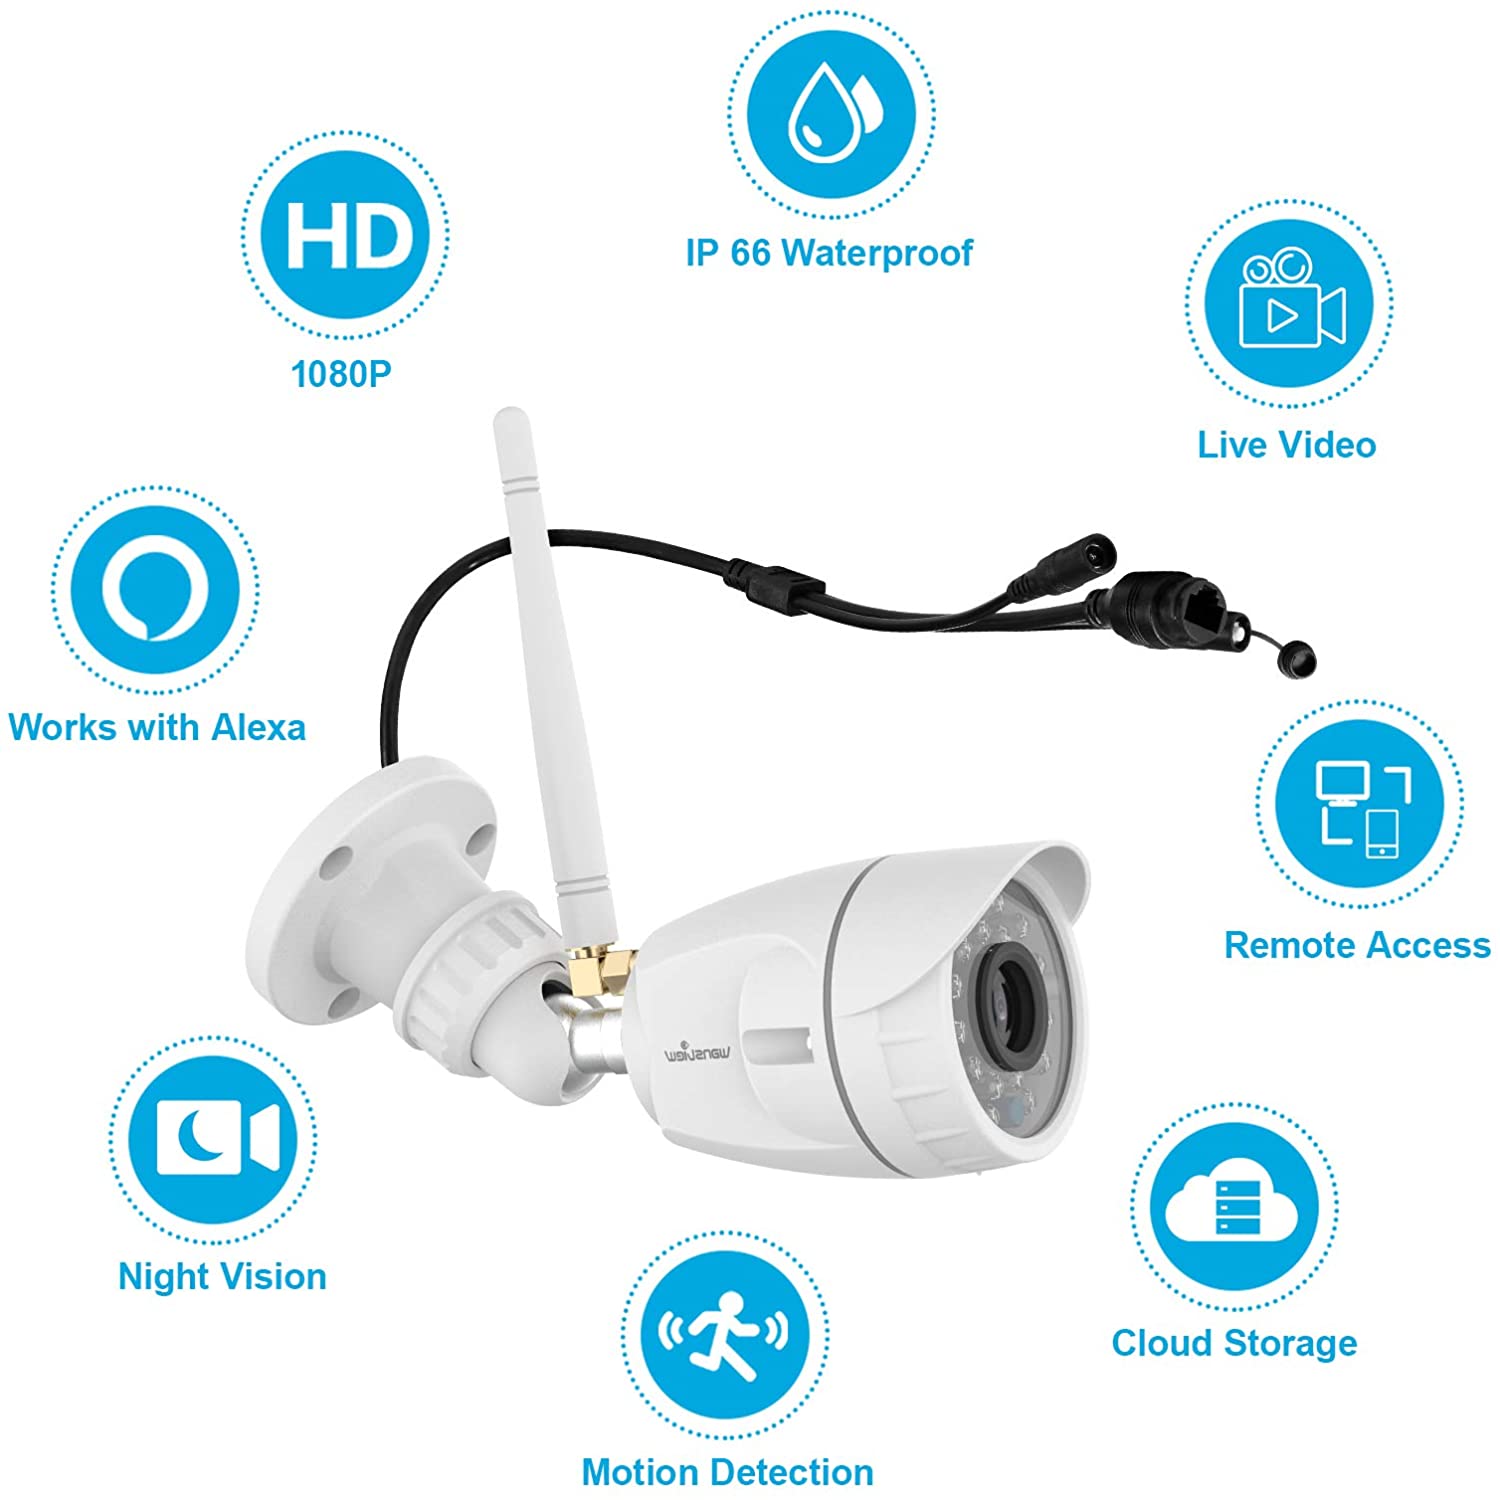 Wansview W4 1080P WiFi Home Surveillance Waterproof Camera with Night Vision, Motion Detection, Remote Access, Works with Alexa - White